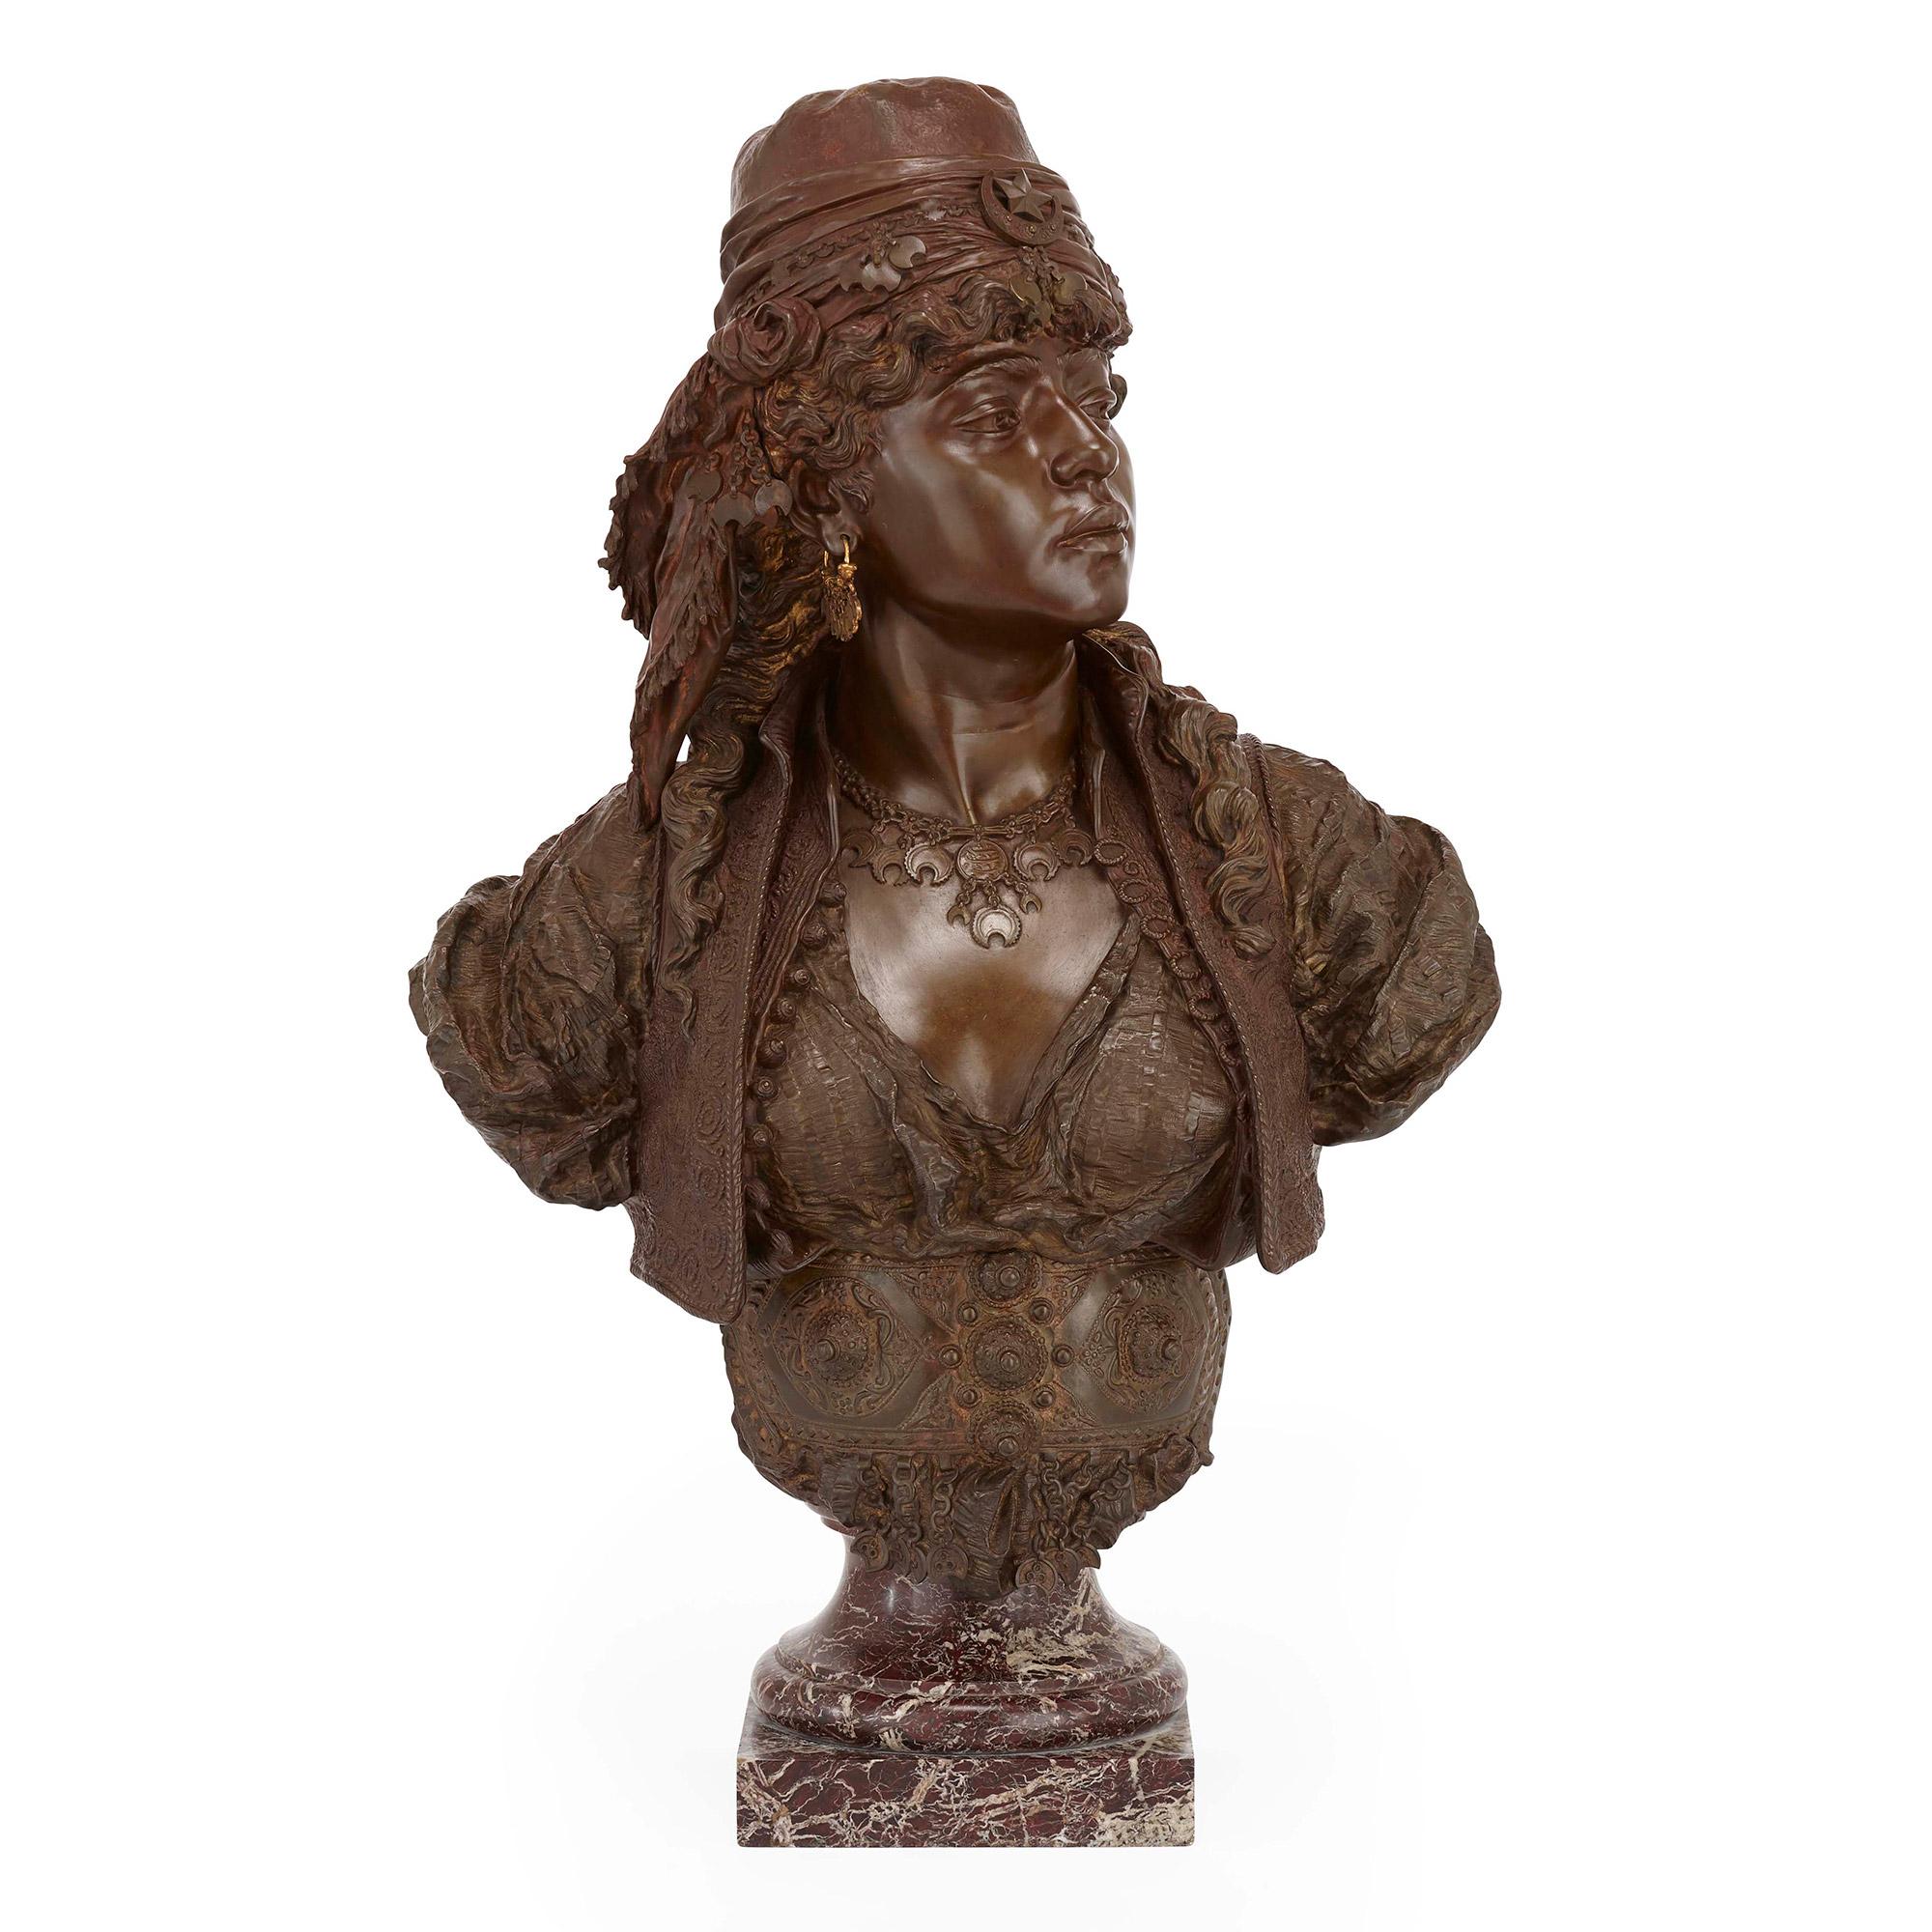 Pair of Orientalist sculpted busts by Guillemin
French, circa 1880-1890
Male figure: Height 89.5cm, width 65cm, depth 40cm
Female figure: Height 79.5cm, width 65cm, depth 40cm

It is the exceptional quality of the casting, as well as the